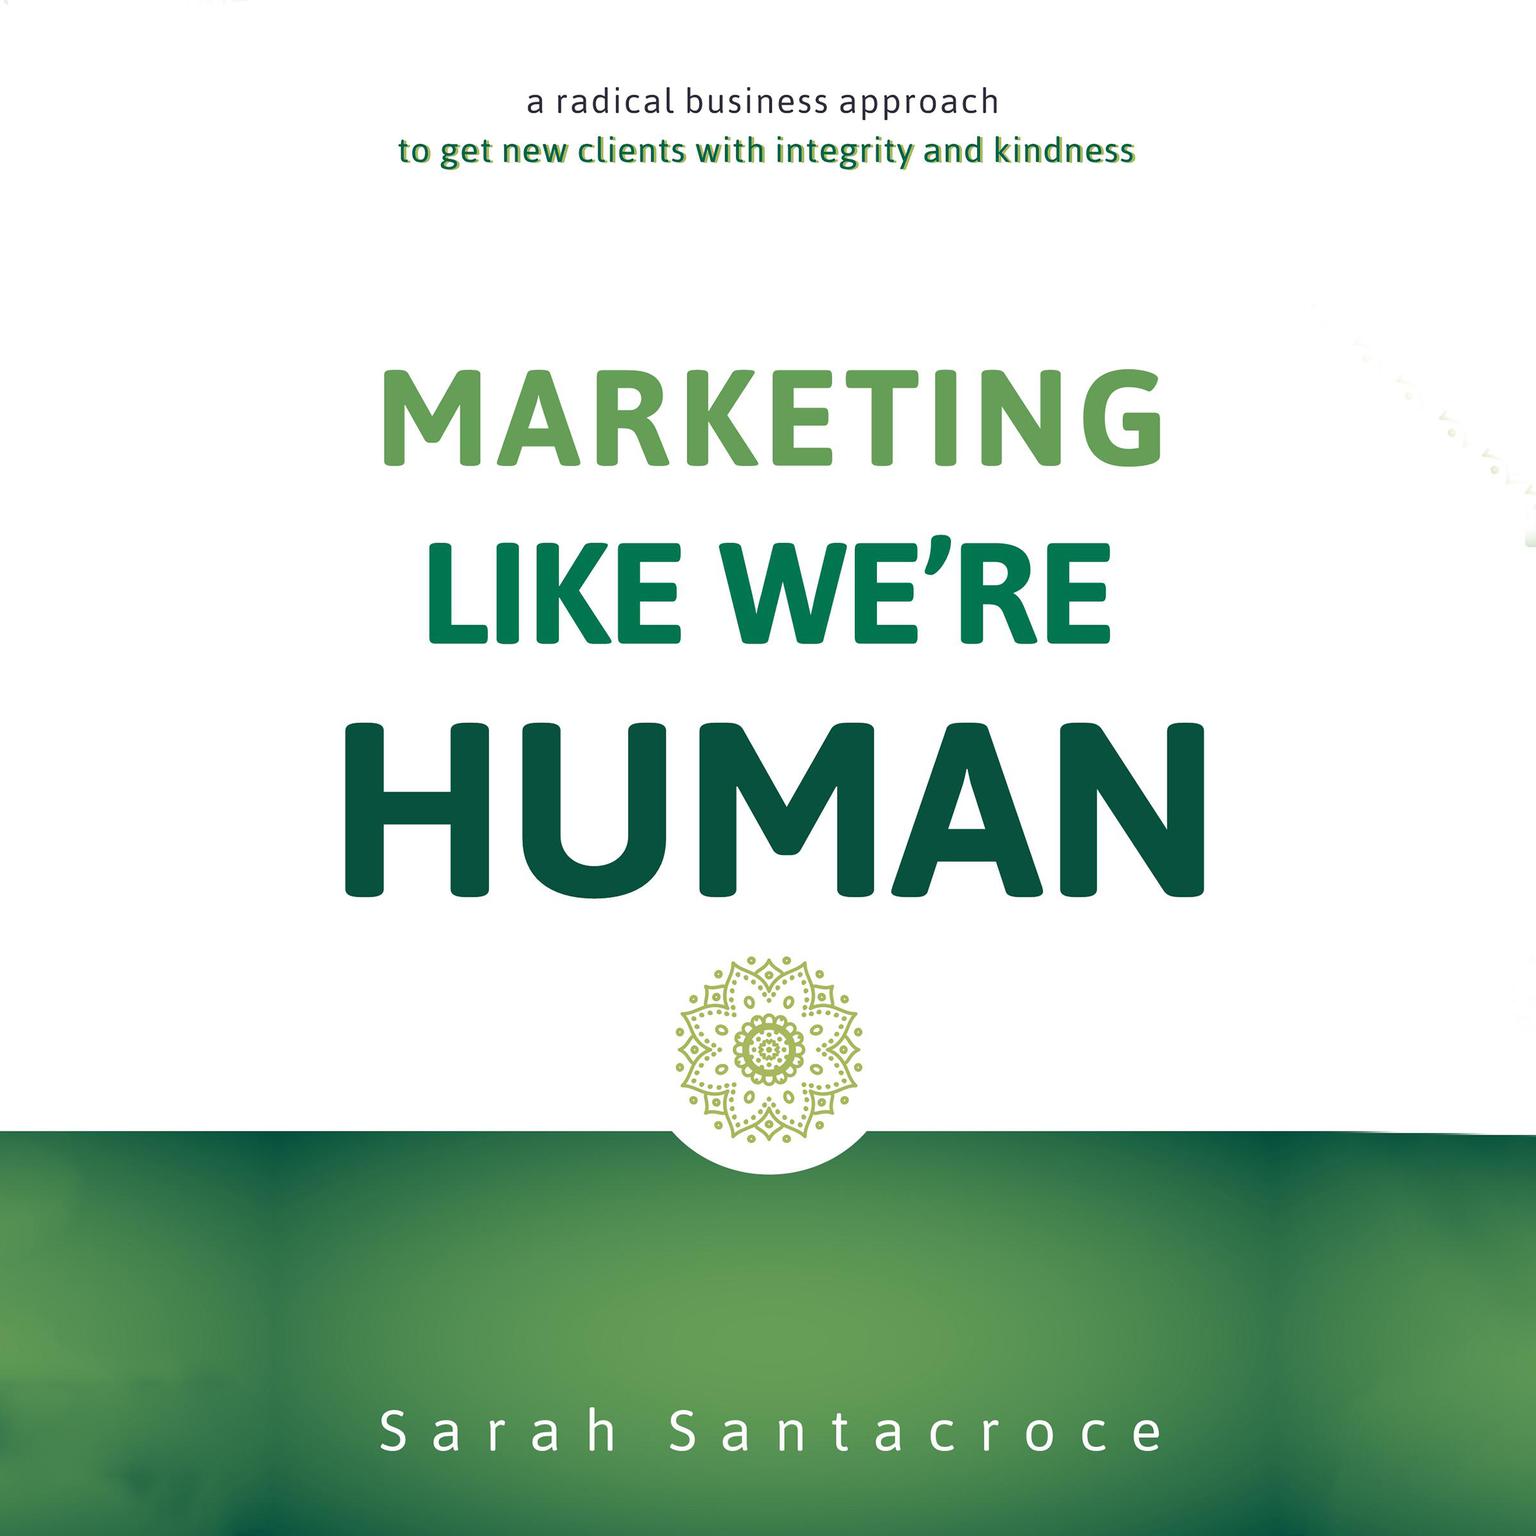 Marketing Like Were Human: A Radical Business Approach to Get New Clients with Integrity and Kindness Audiobook, by Sarah Santacroce